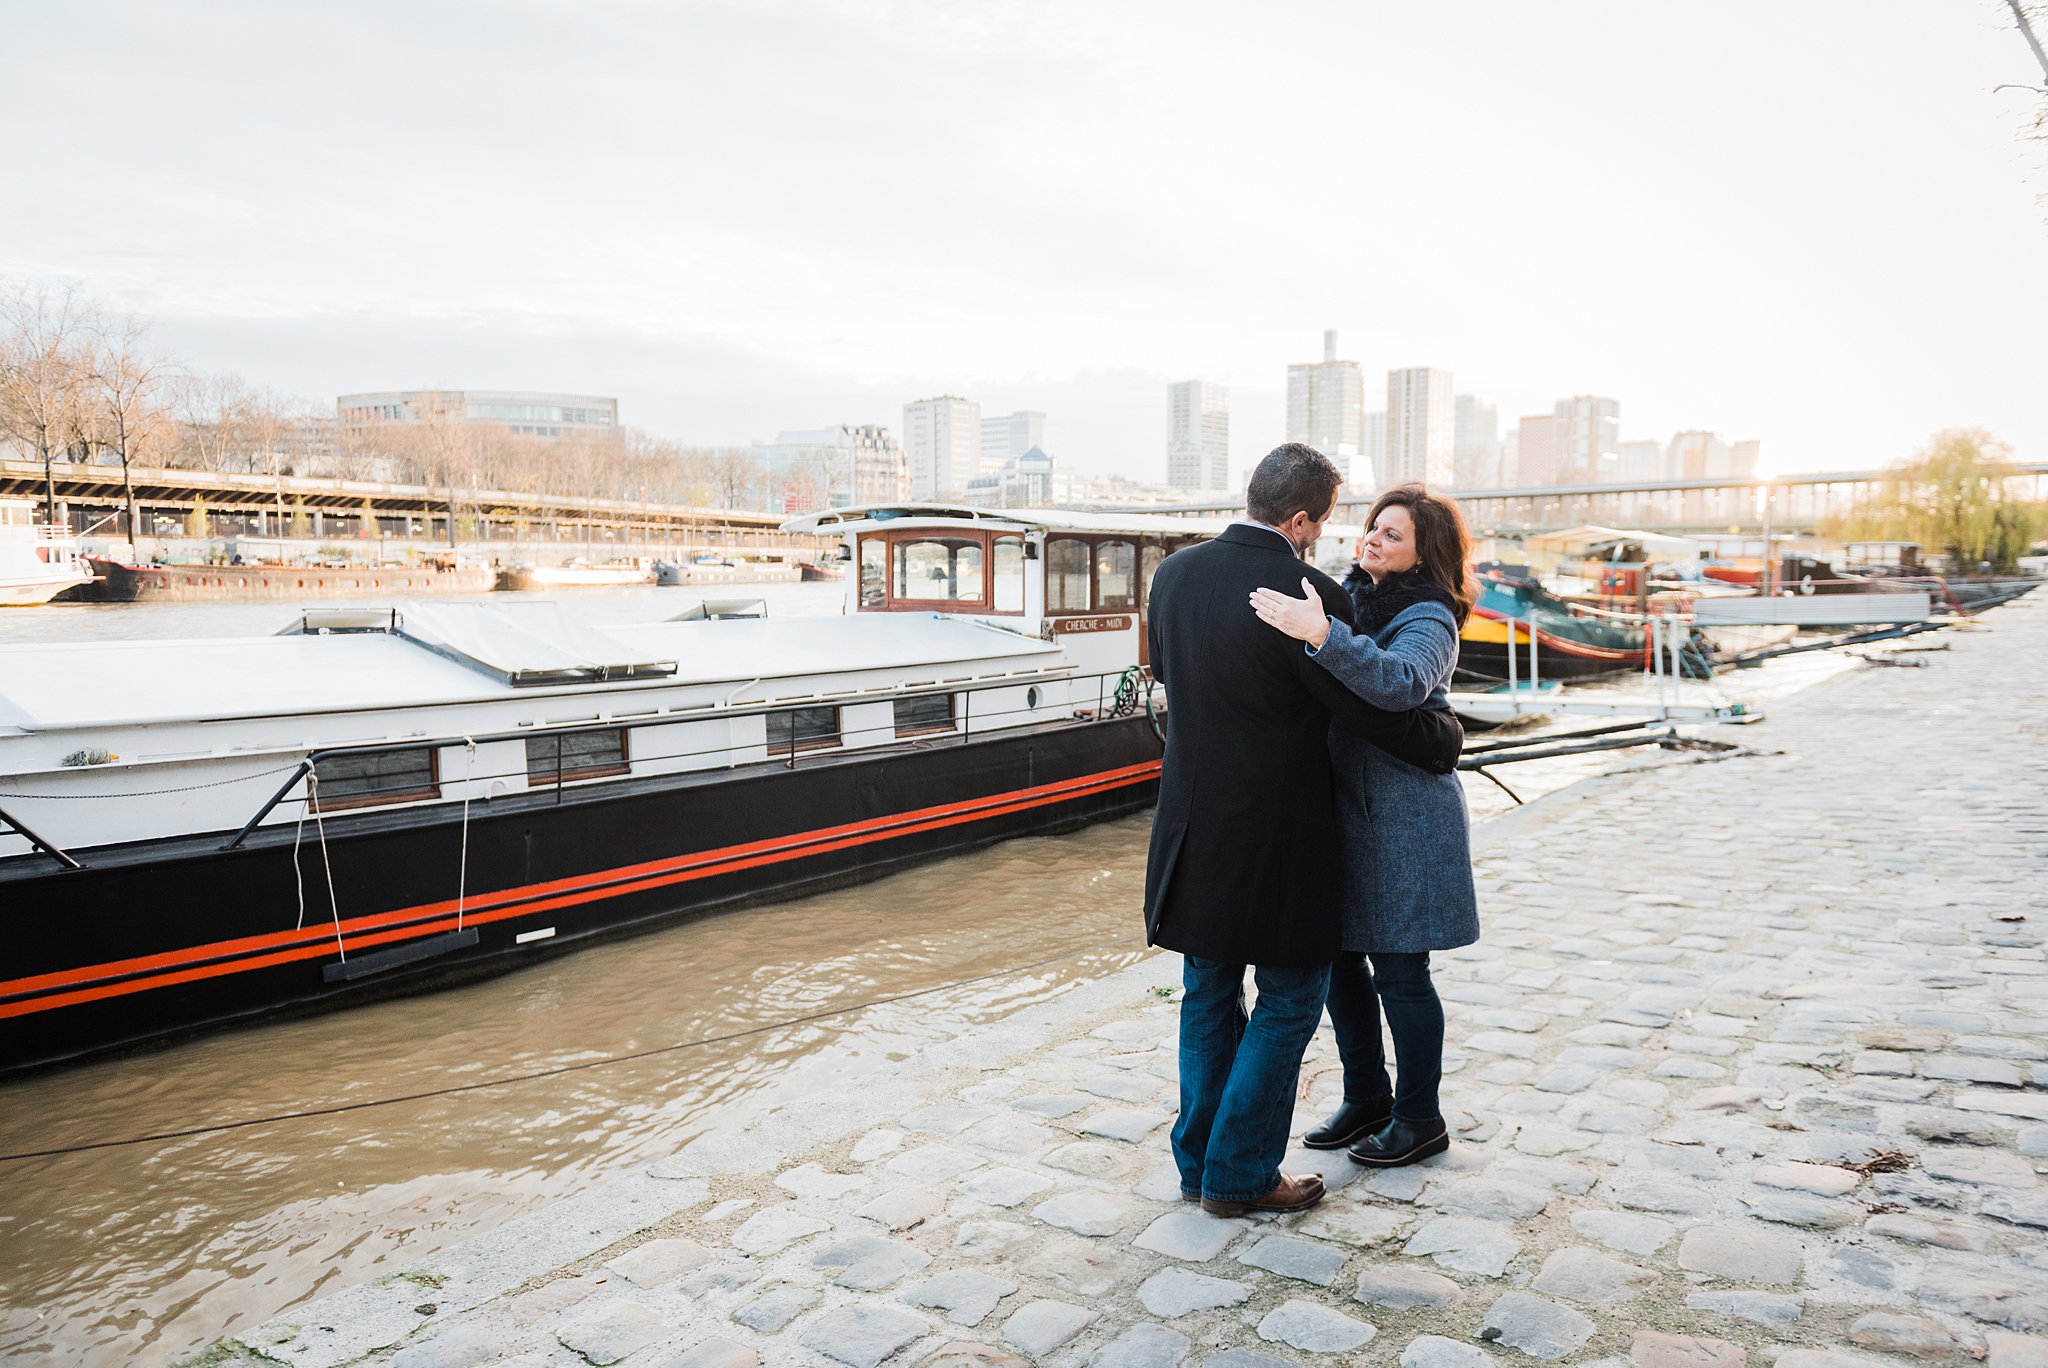 25th anniversary couples photography session by the seine river in Paris, France